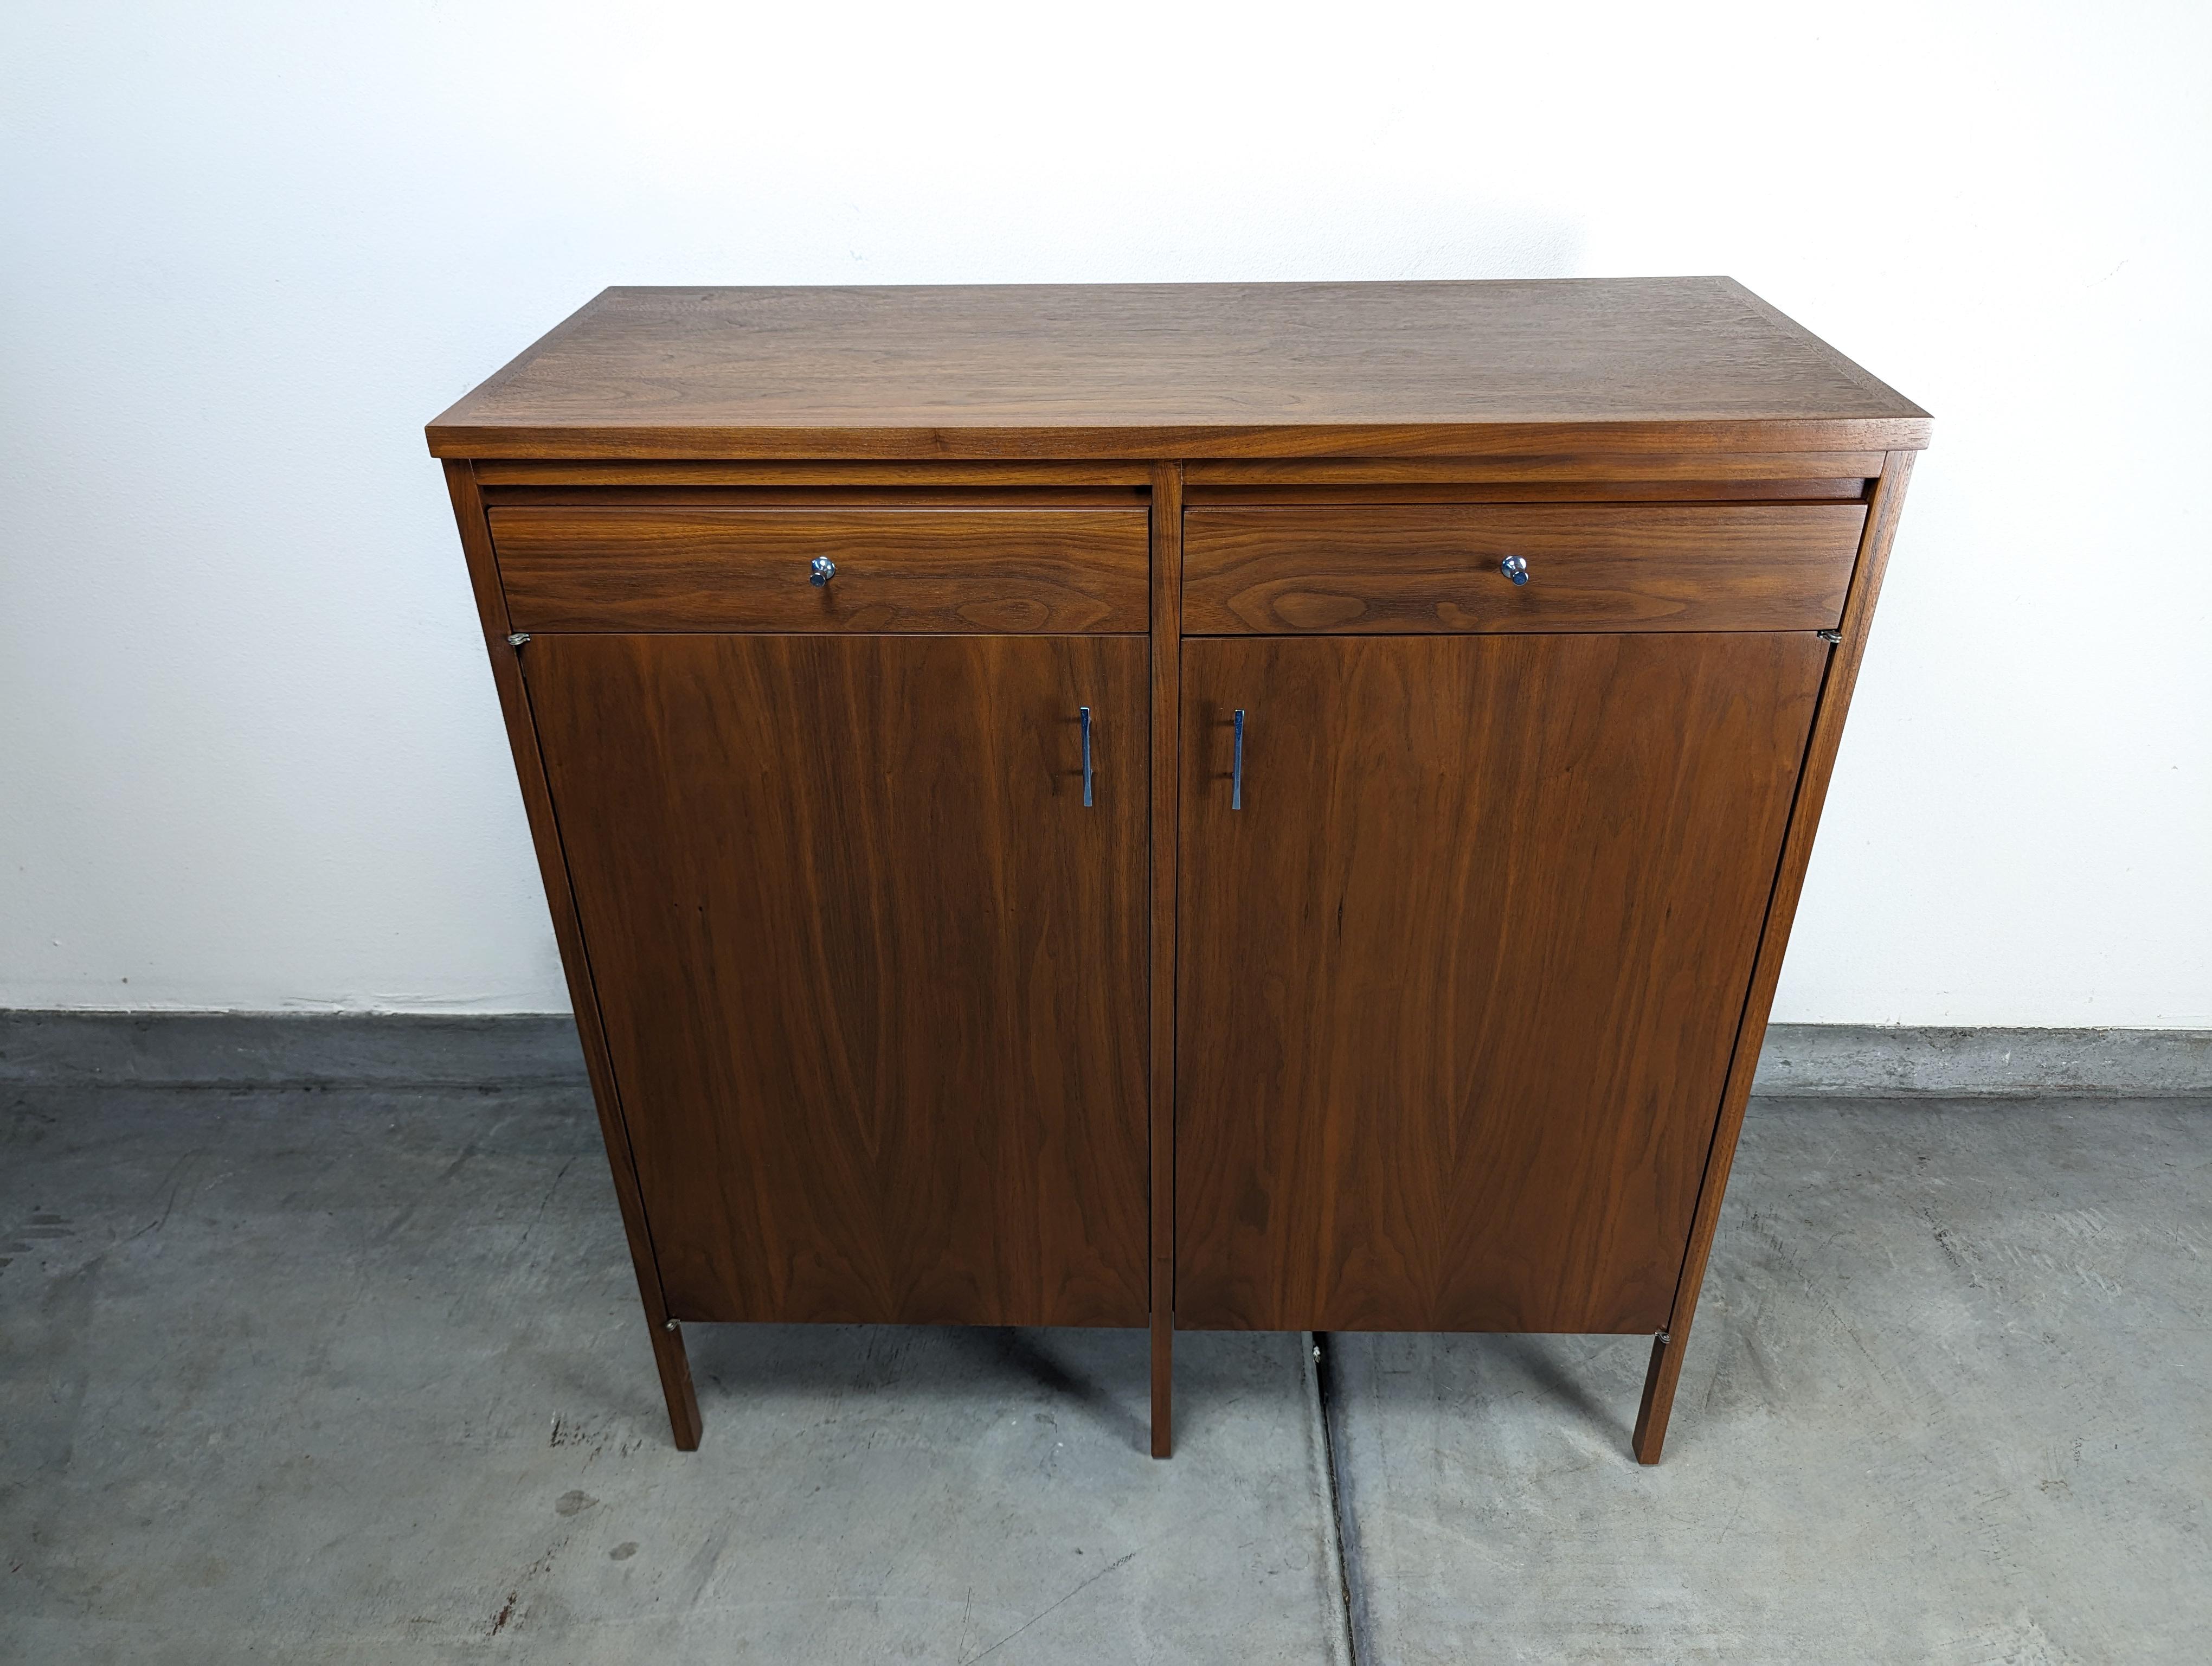 American Mid Century Modern Delineator Chest of Drawers by Paul McCobb for Lane, c1960s For Sale